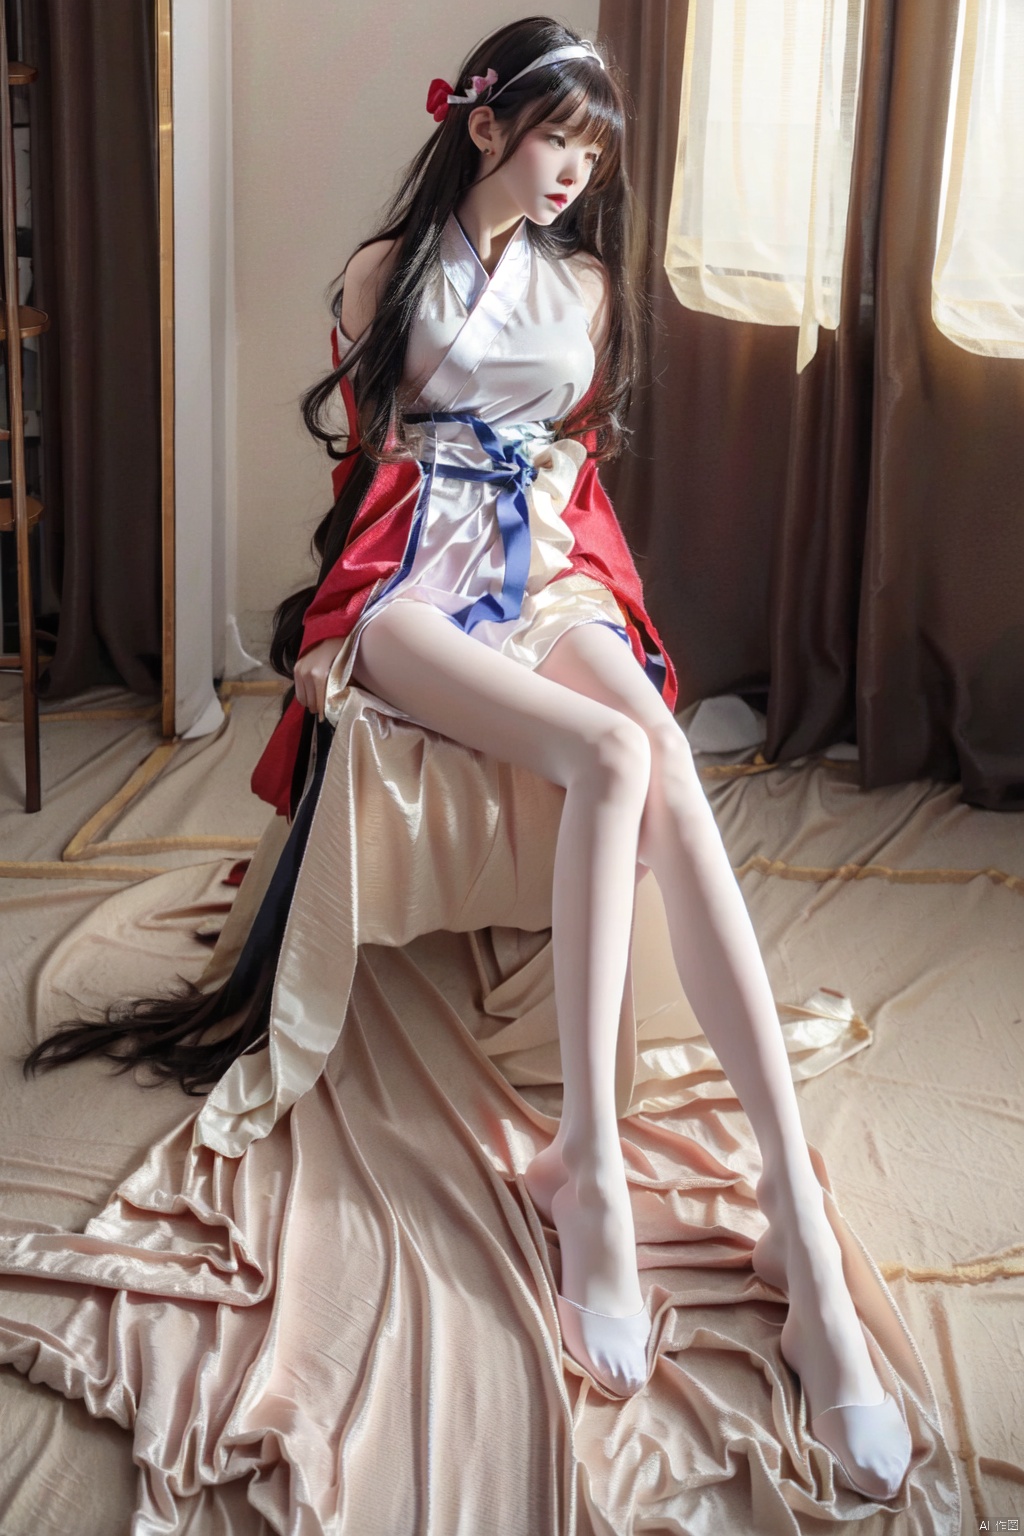 Cat ears, cat mother, white hair, pink pupils, white Hanfu, white lace lace pantyhose, no underwear or bra, bare feet, no shoes, slim legs, beautiful back, fragrant shoulders, protruding nipples, white hand protection, blushing face, blurred eyes, wearing earrings, candy colored, red crescent shaped tattoos on legs and shoulders. On the ice surface, heavy snow flies
跟